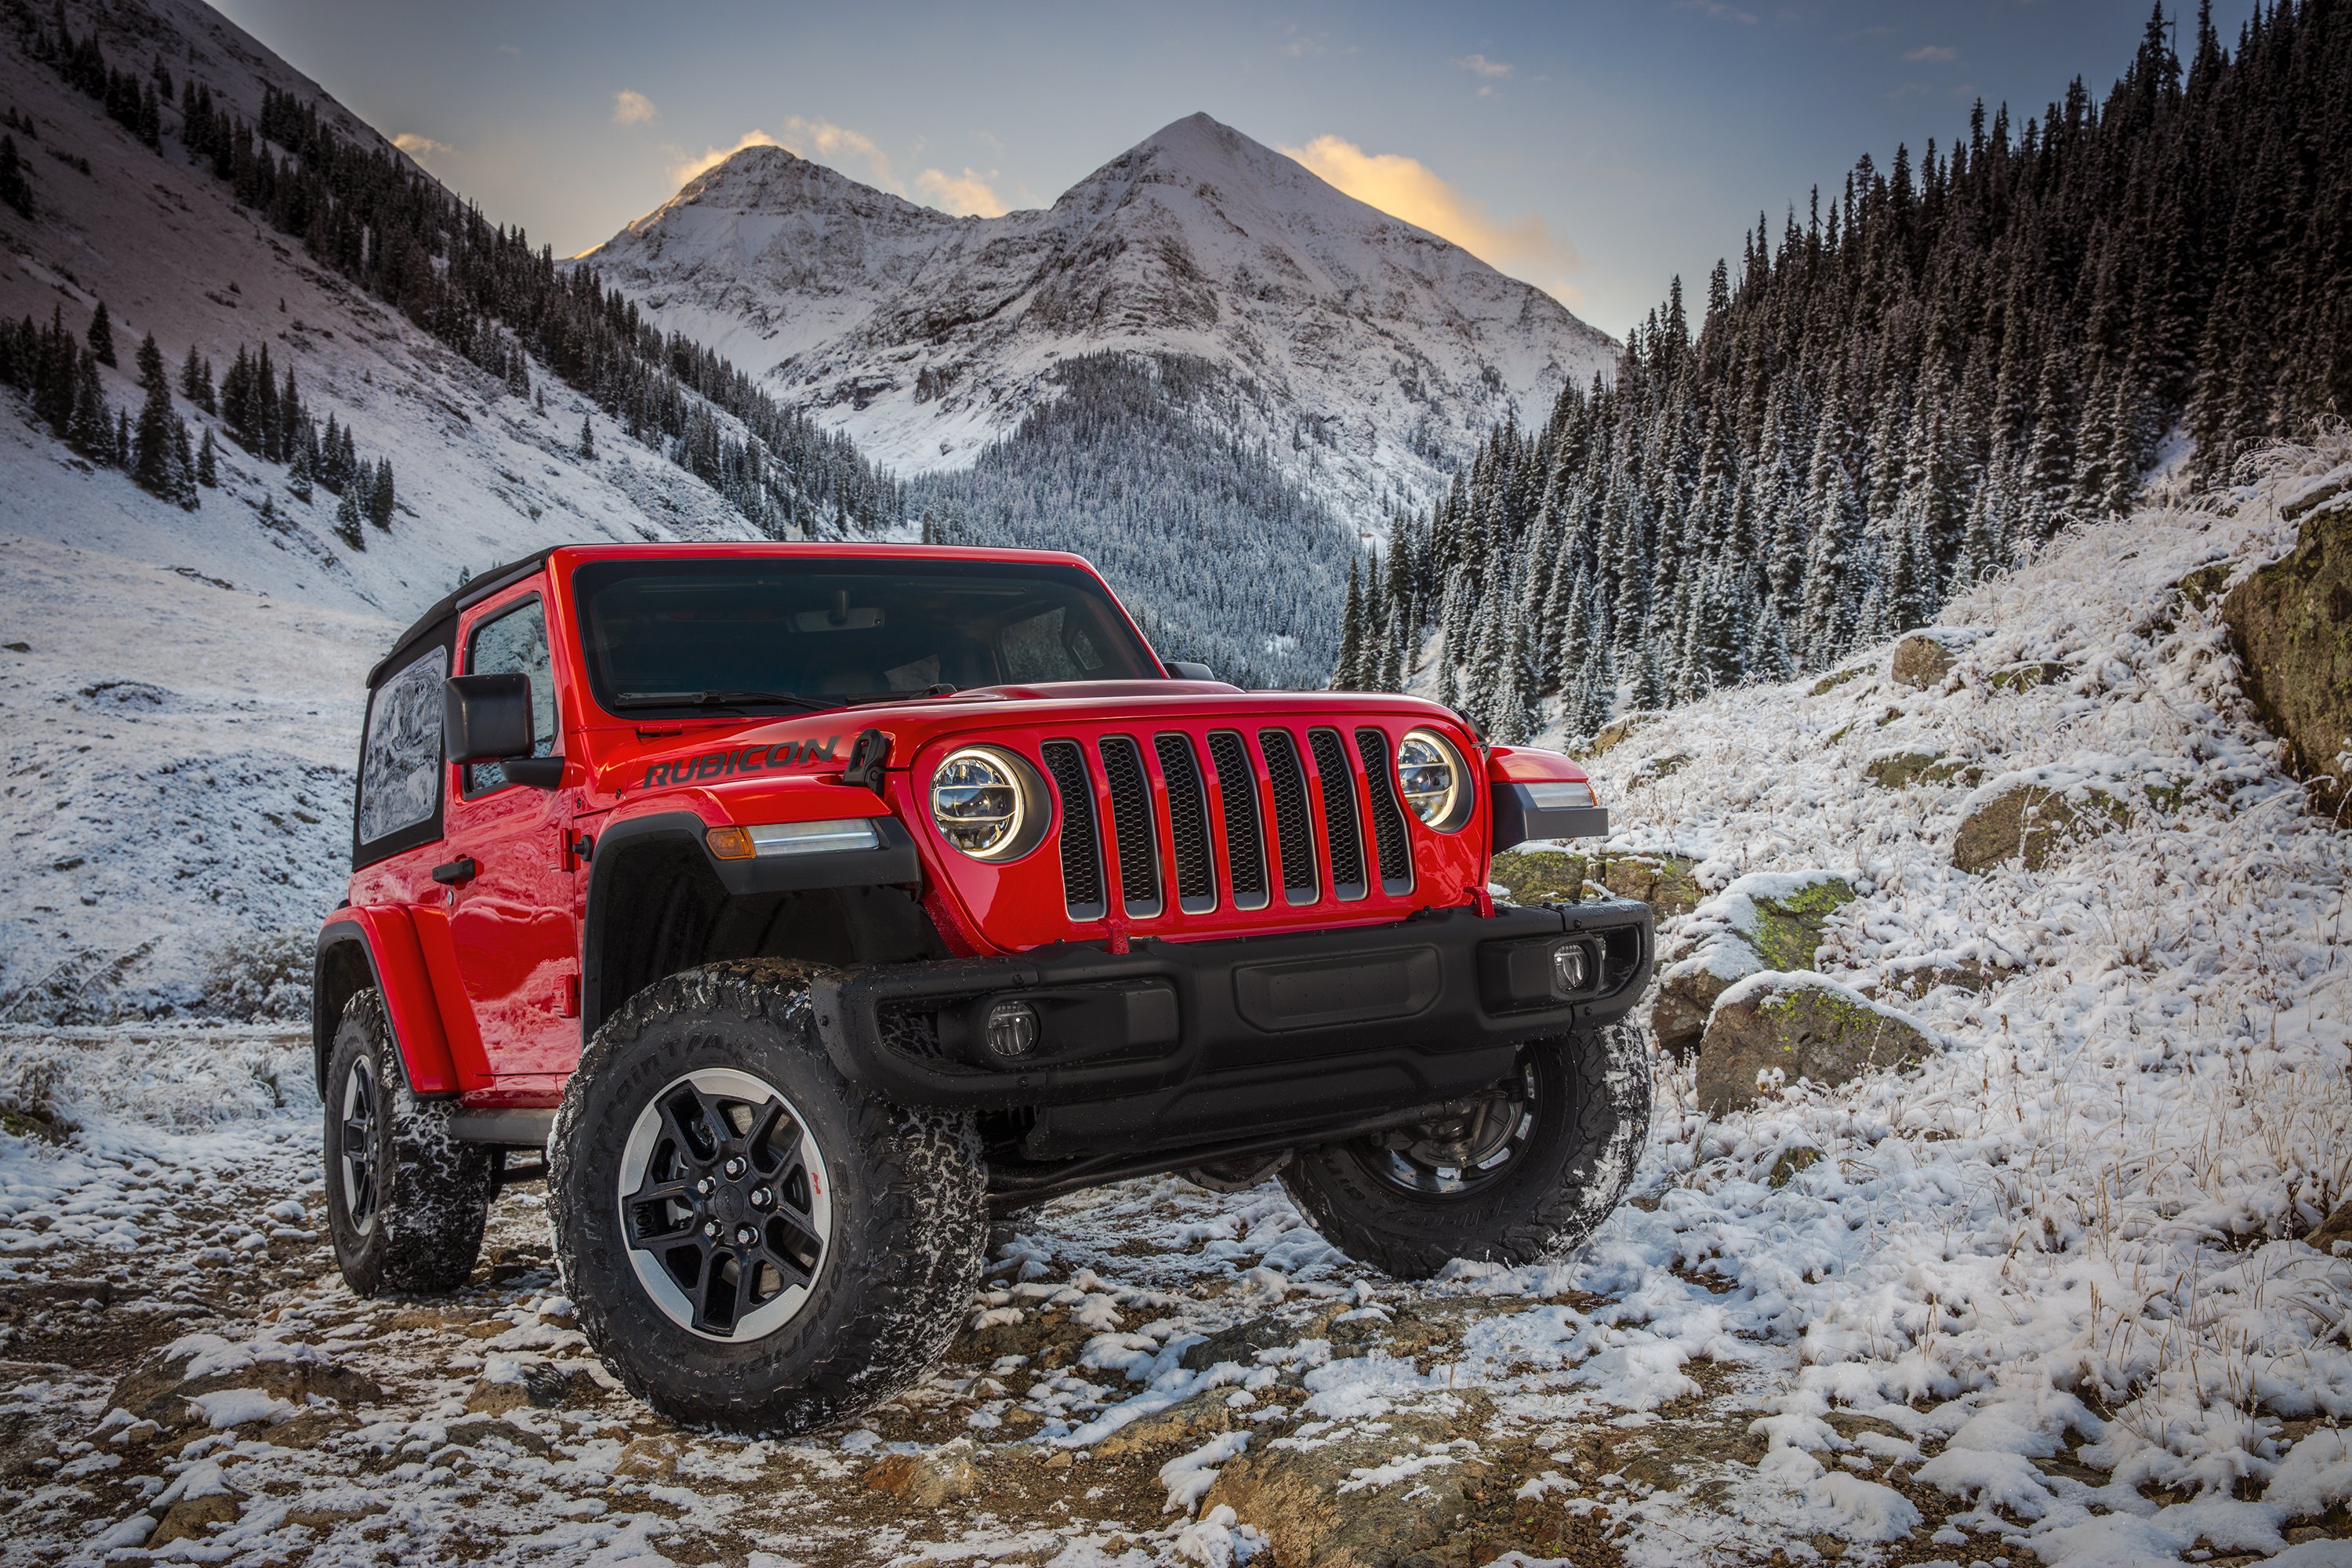 The Jeep death wobble impacts the Wrangler seen here on a mountain